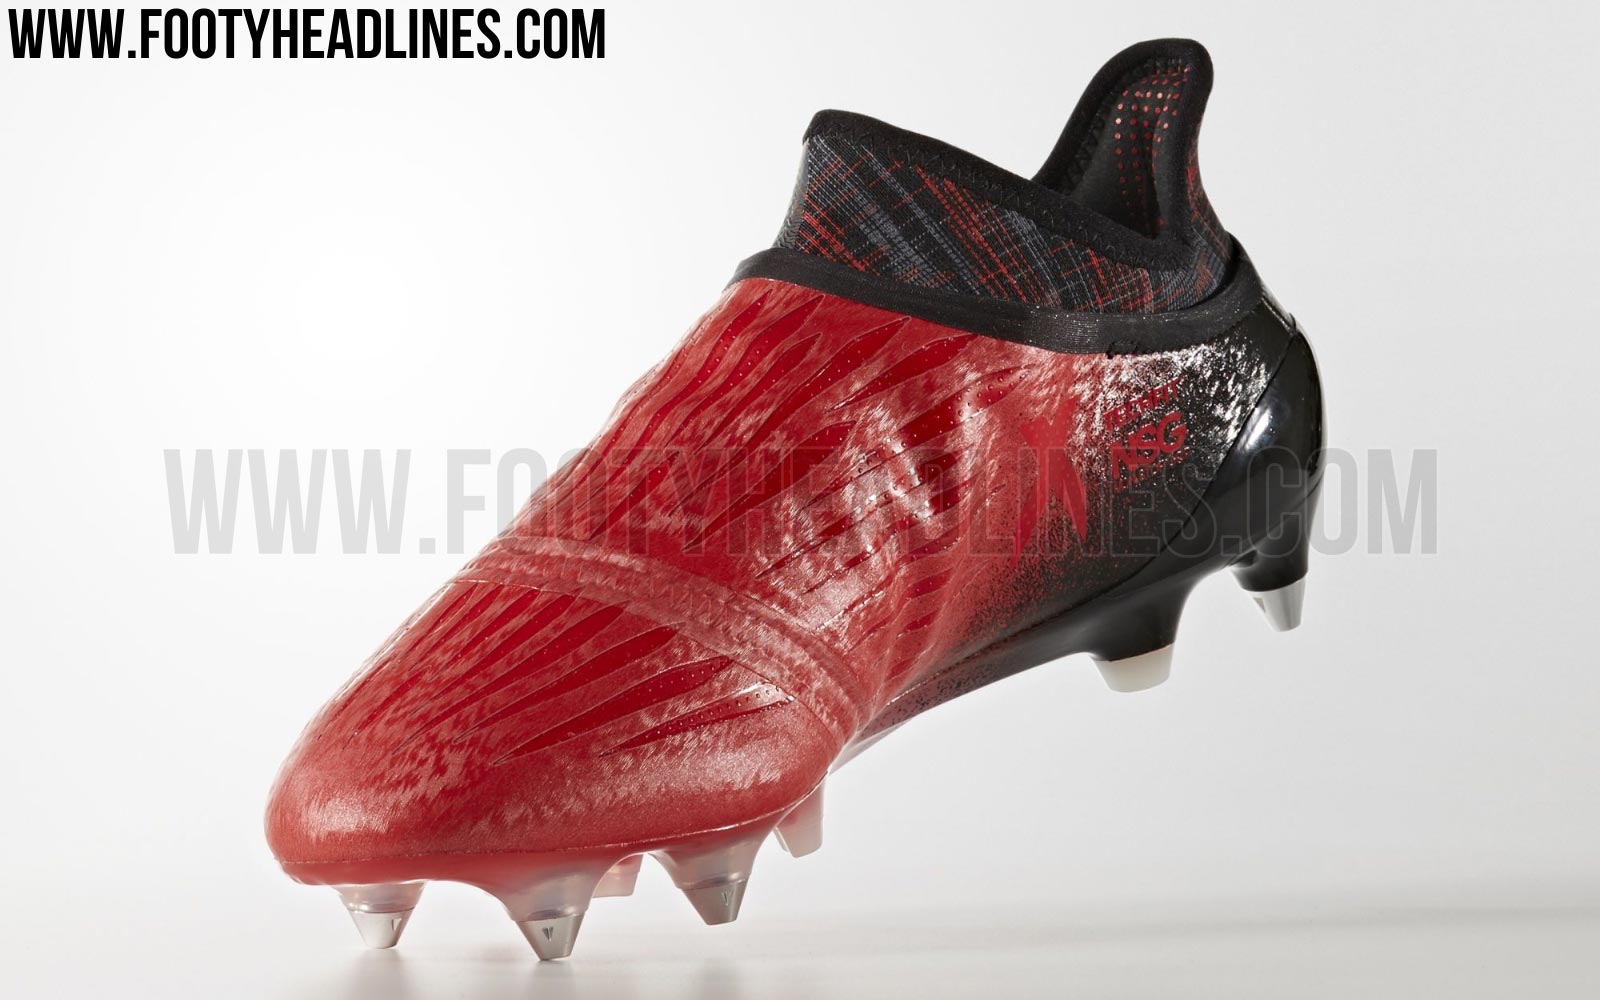 Stunning Adidas X PureChaos Red Limit Boots Released - Headlines